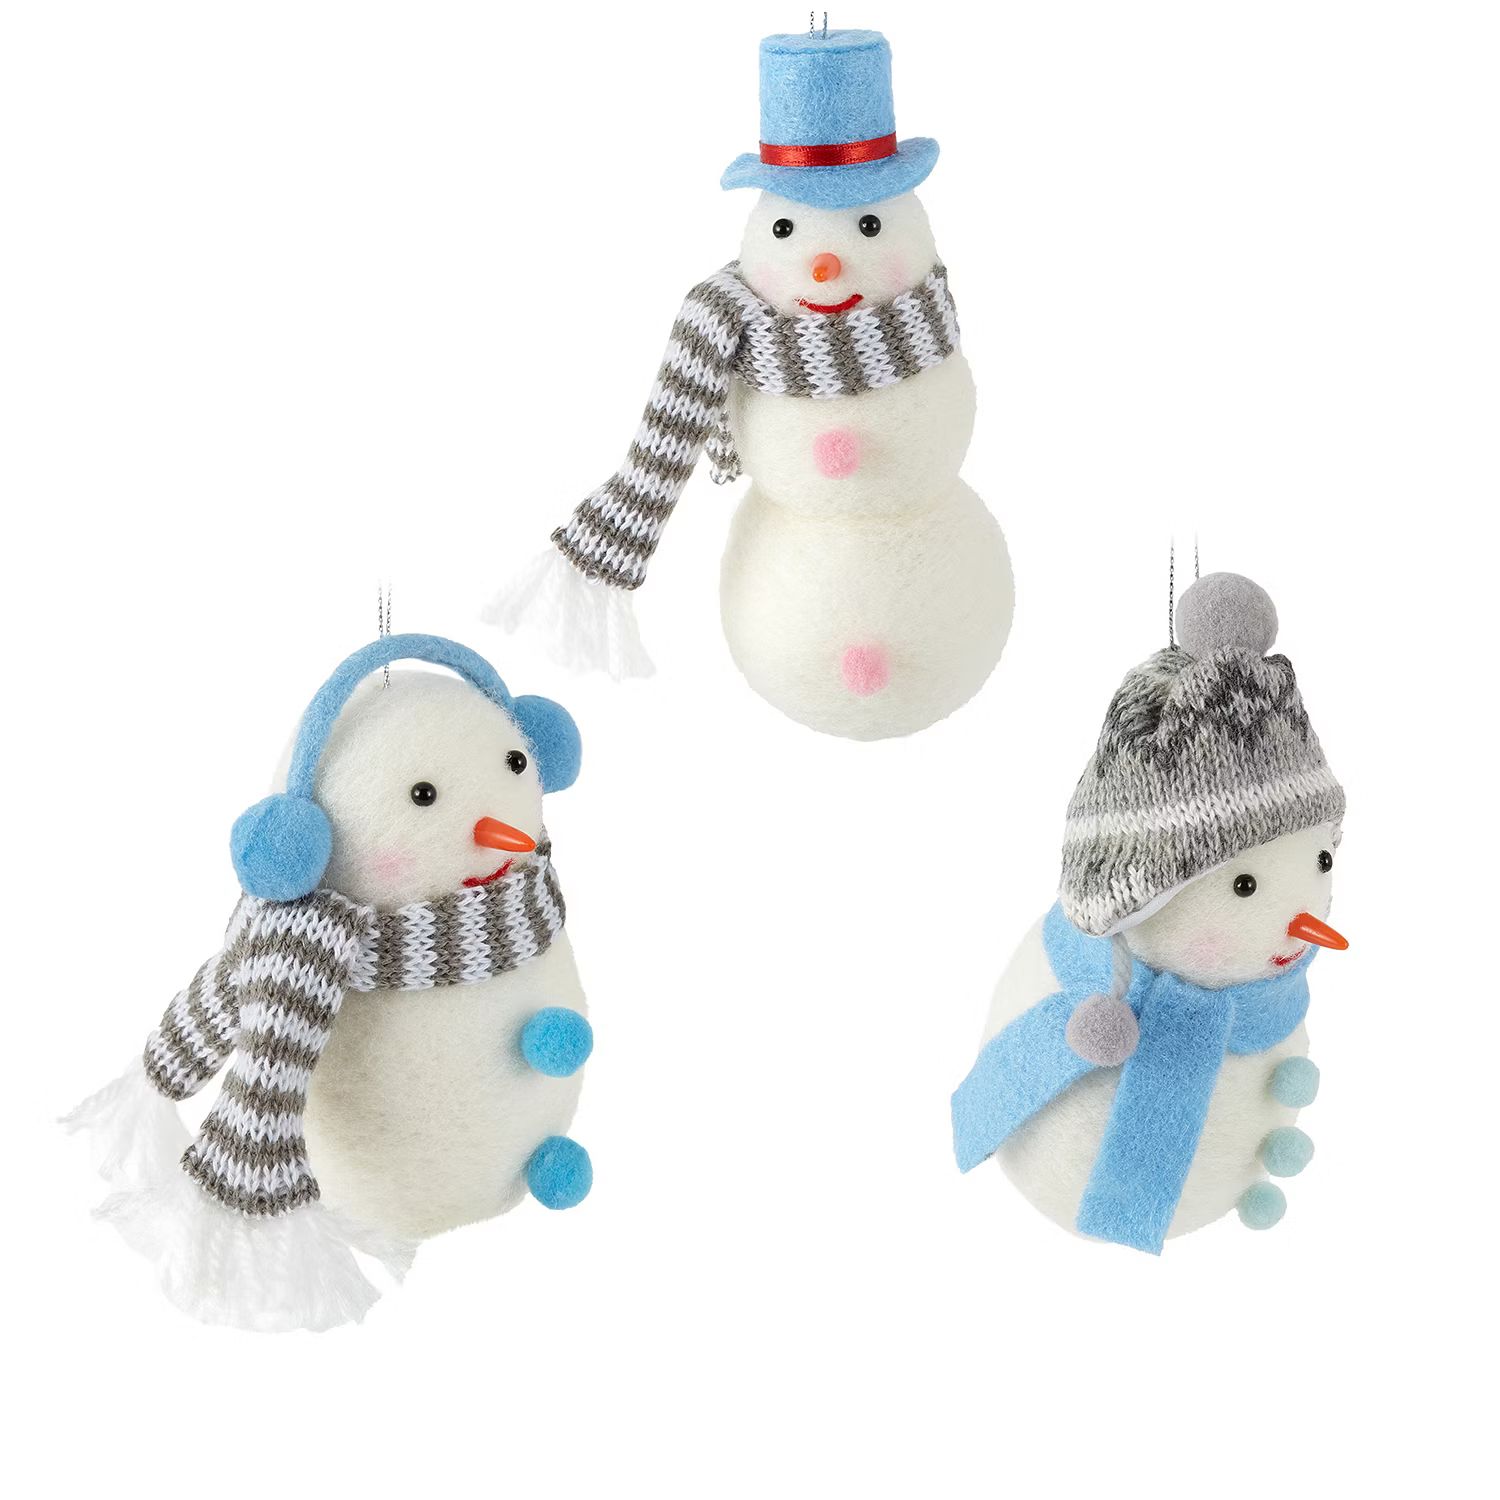 North Pole Trading Co. Snowman Christmas Ornament | JCPenney